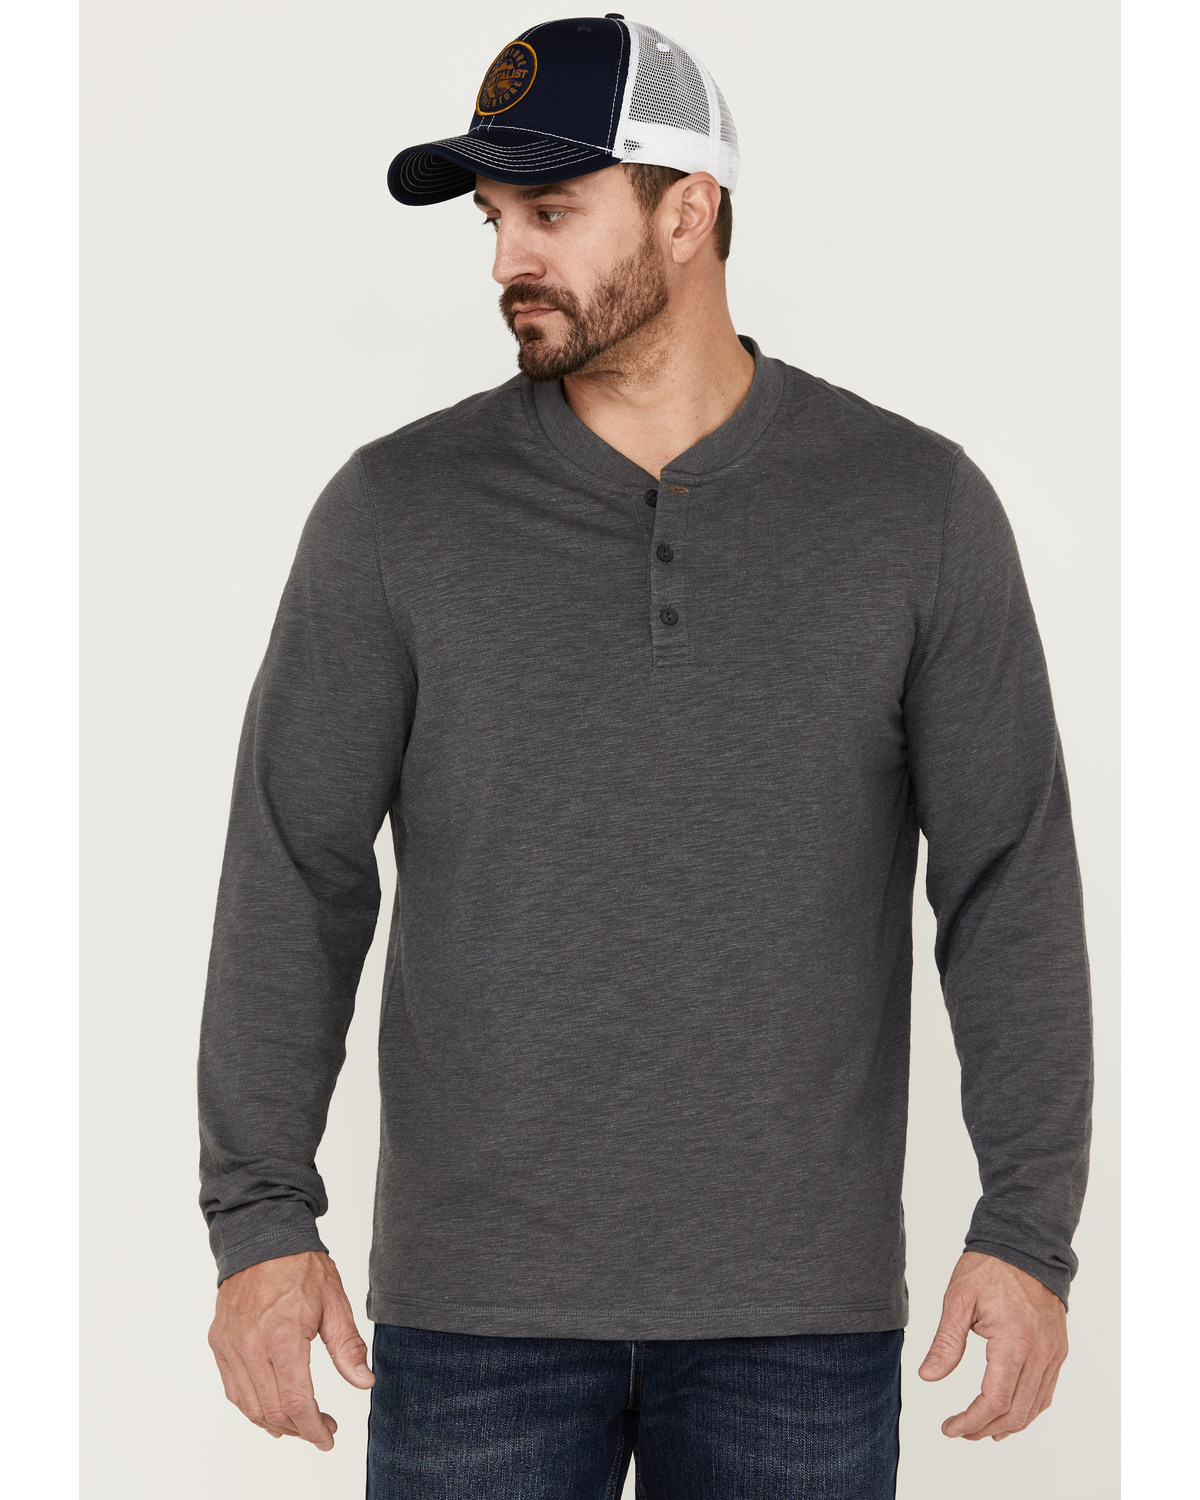 Brothers and Sons Men's Solid Heather Slub Long Sleeve Henley Shirt